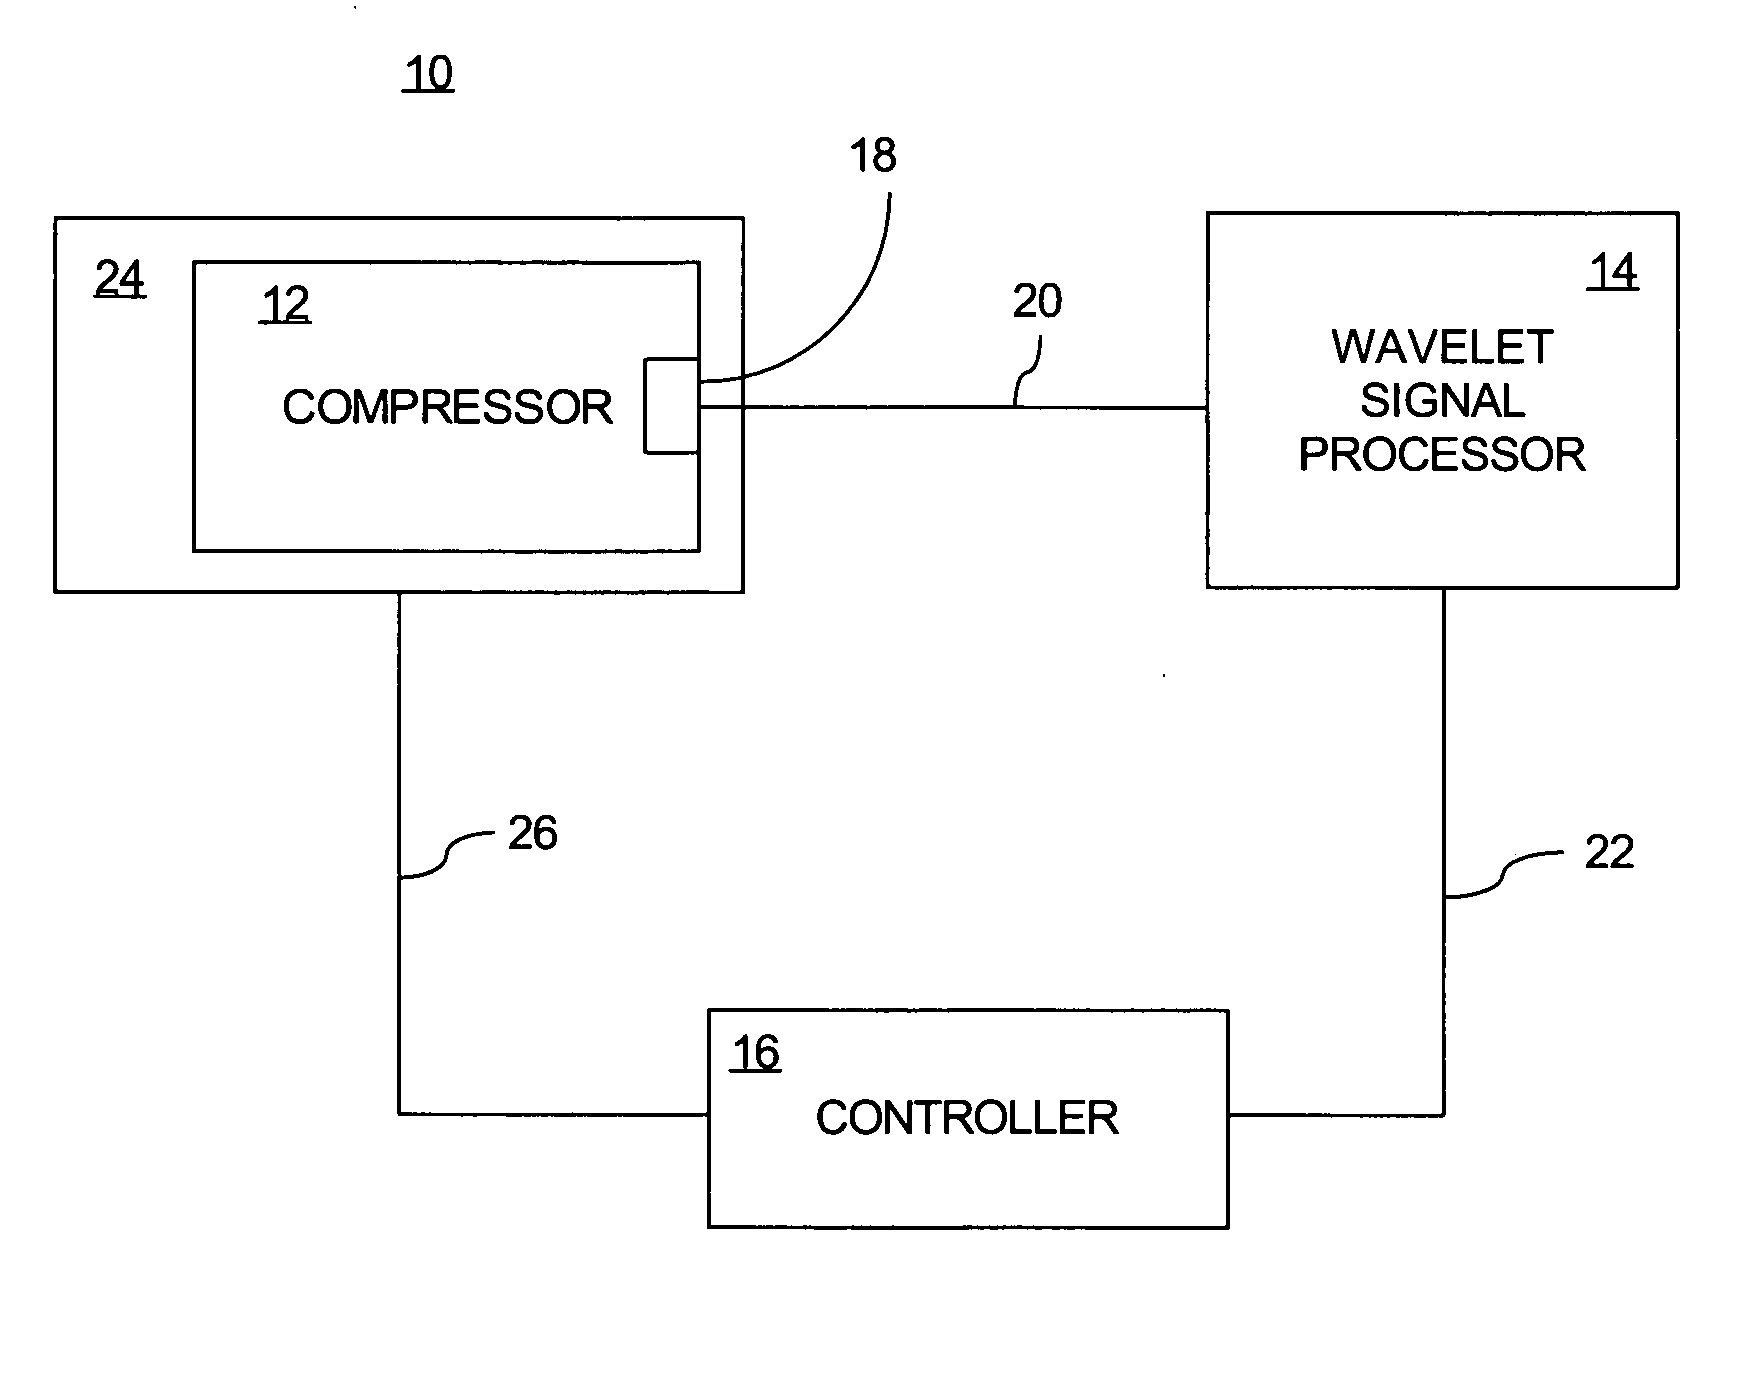 Method and apparatus for detecting compressor stall precursors